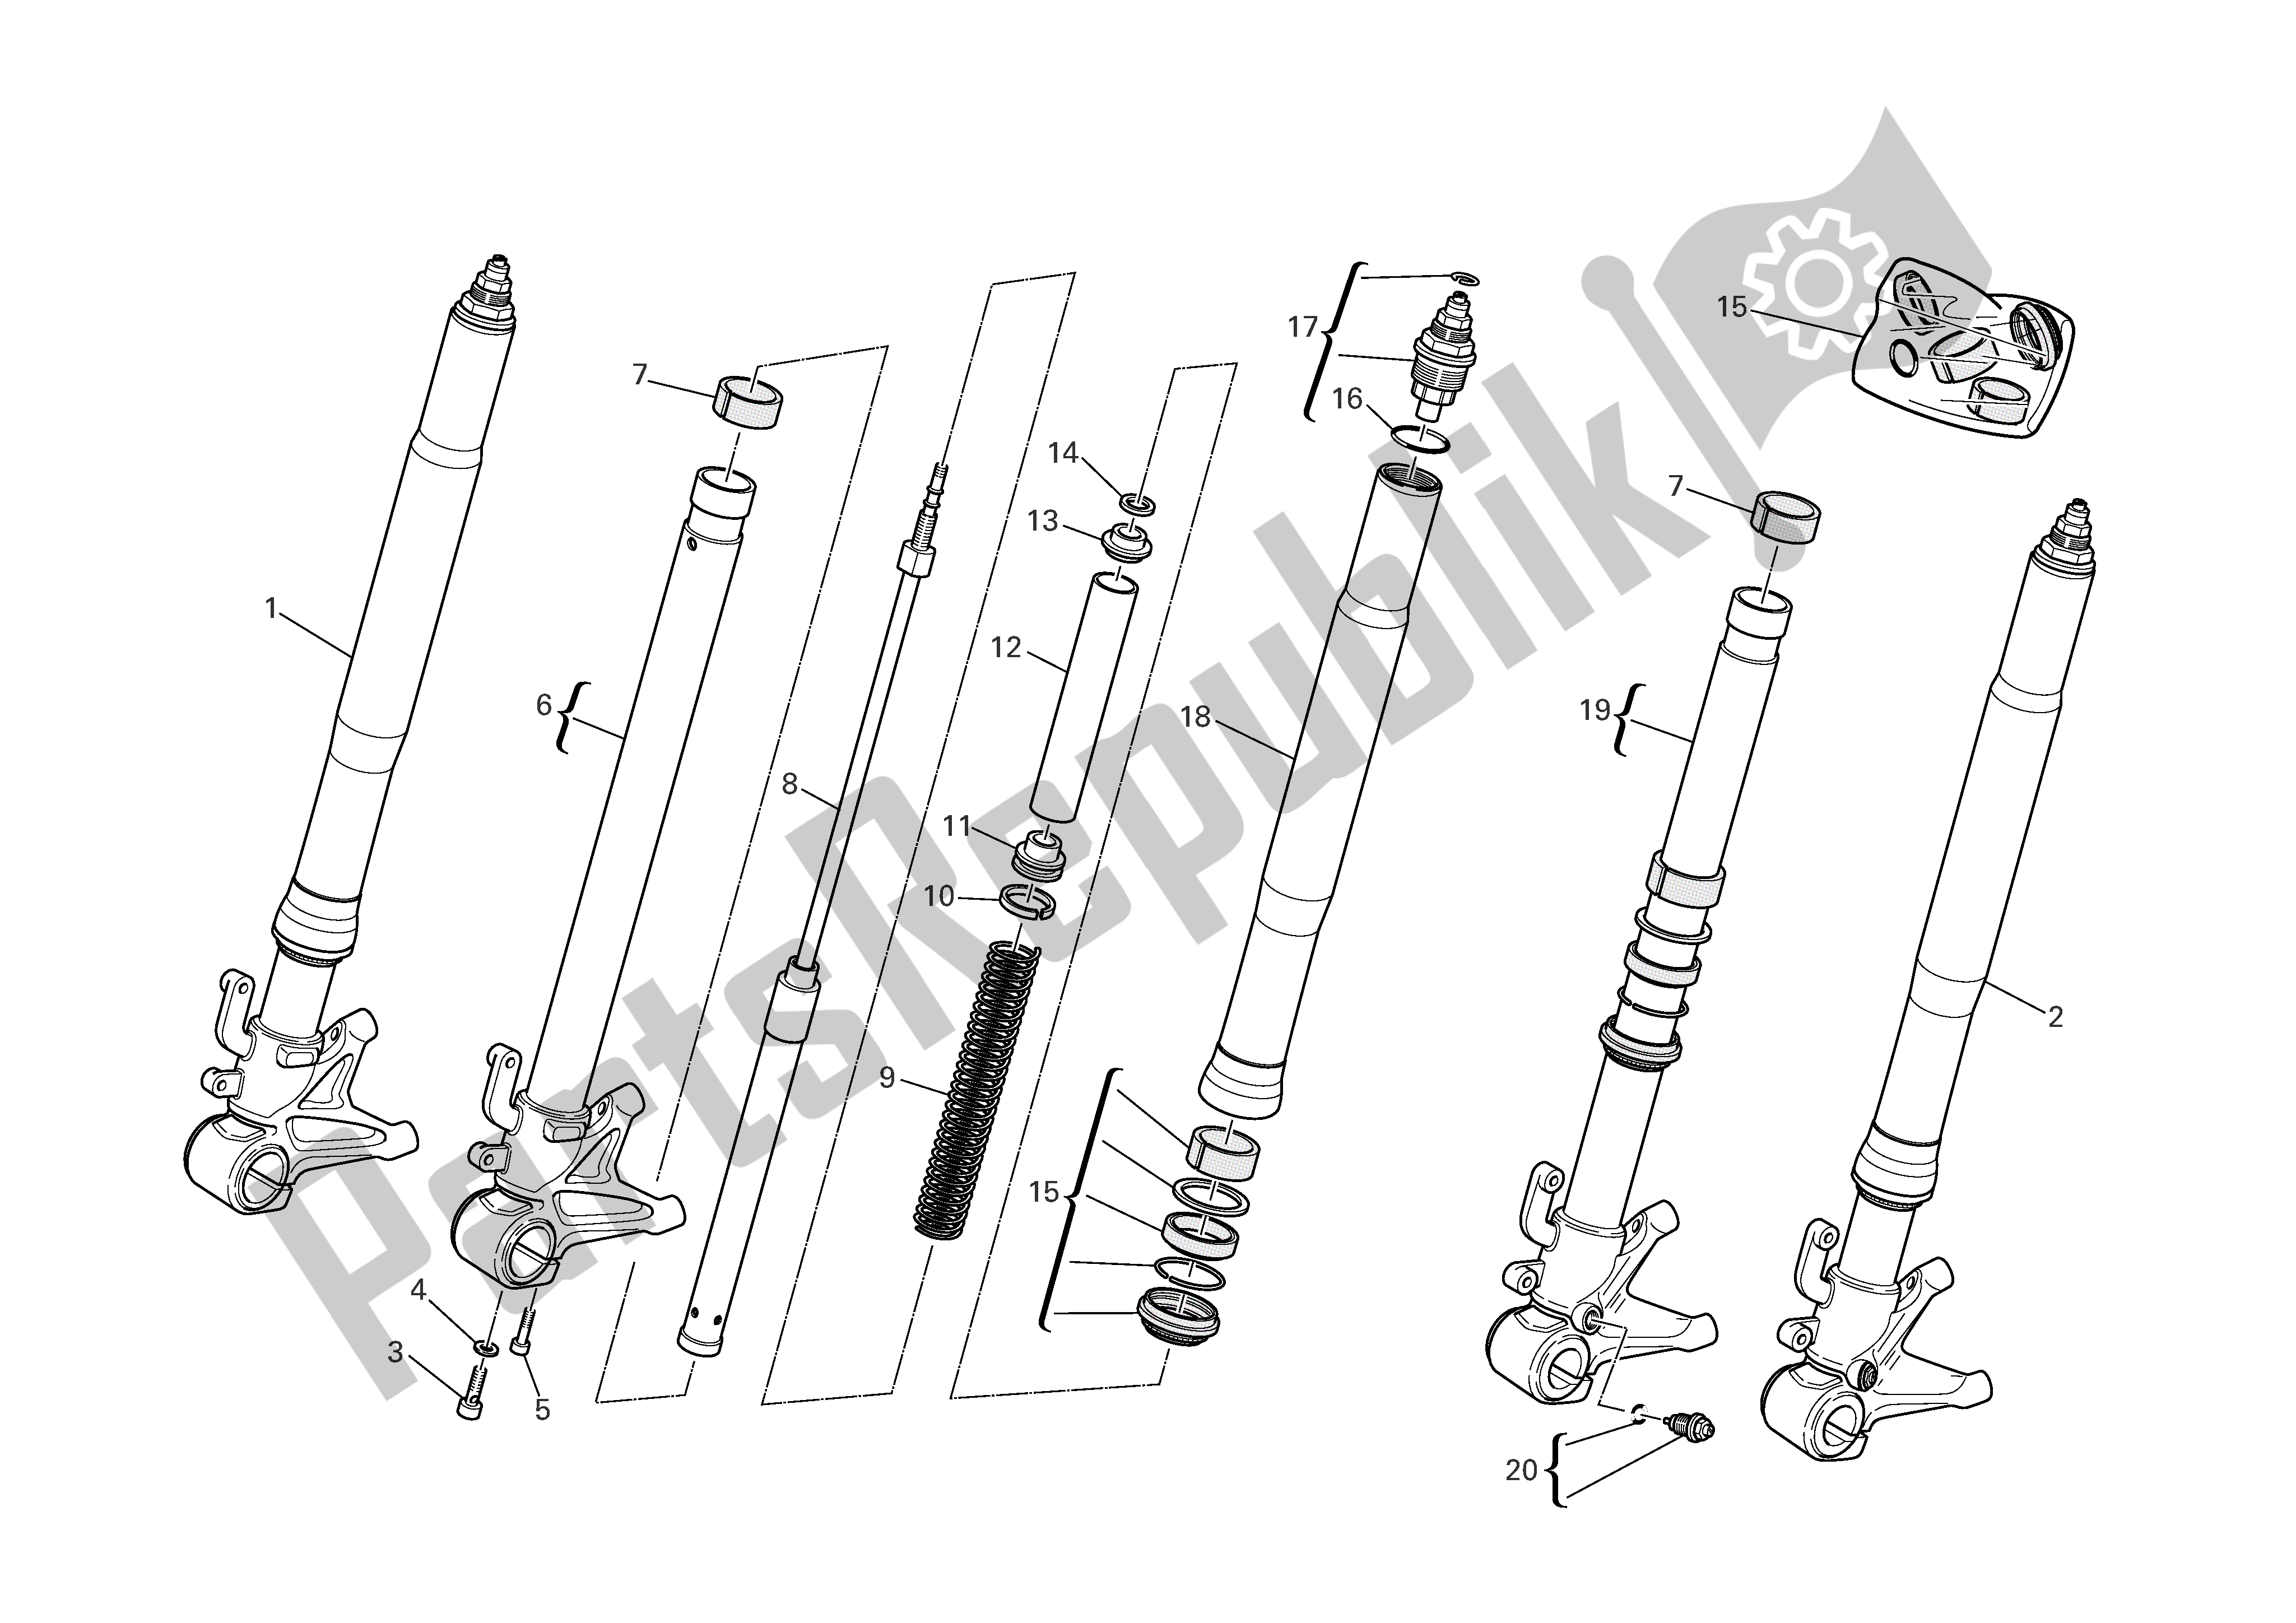 All parts for the Front Forks of the Ducati Monster S4R EU 1000 2008